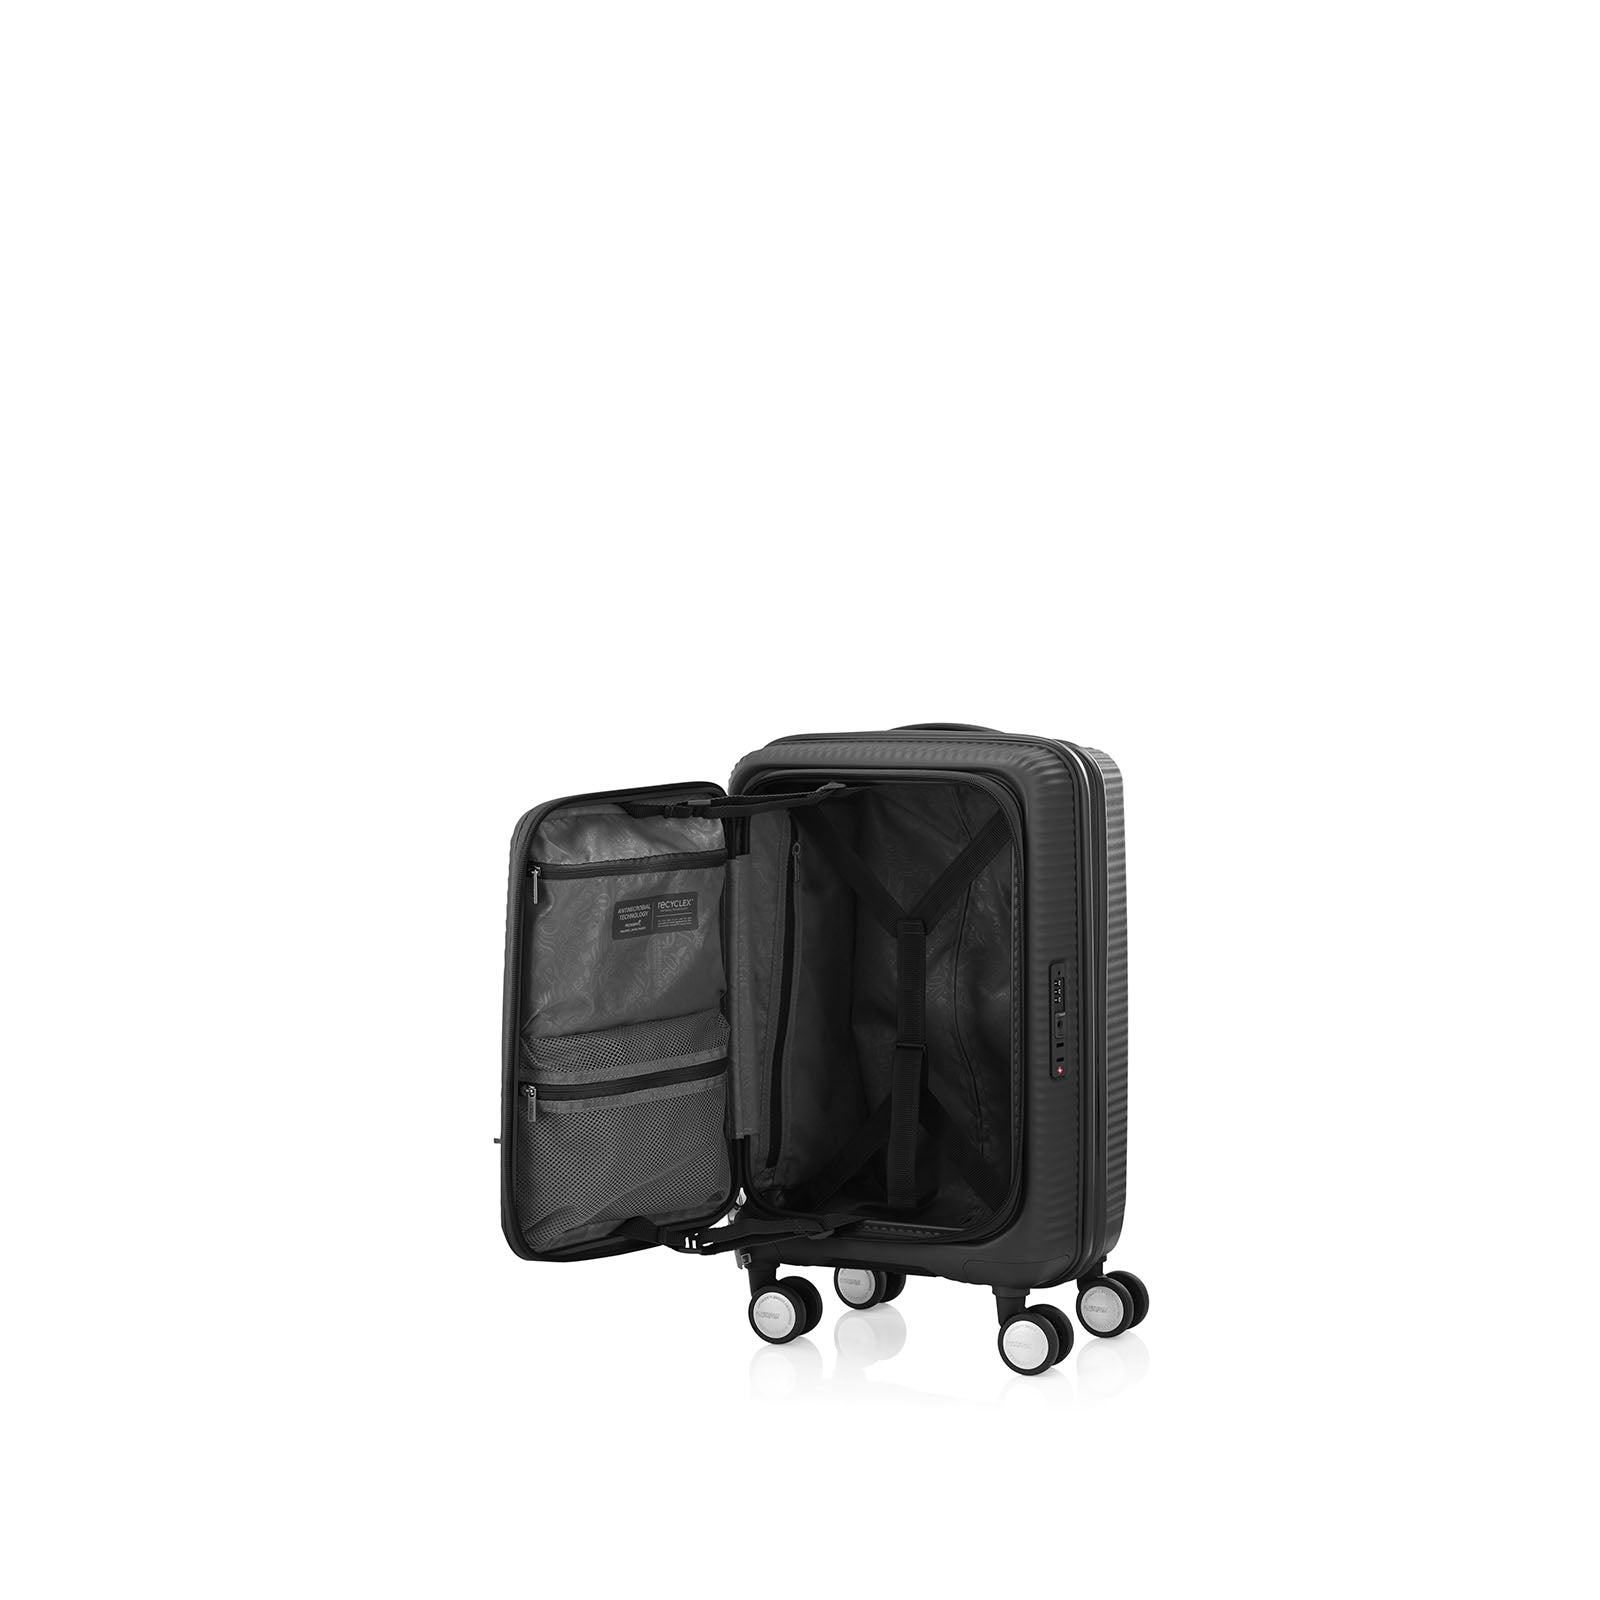 American-Tourister-Curio-Book-Opening-55cm-Carry-On-Suitcase-Black-Open